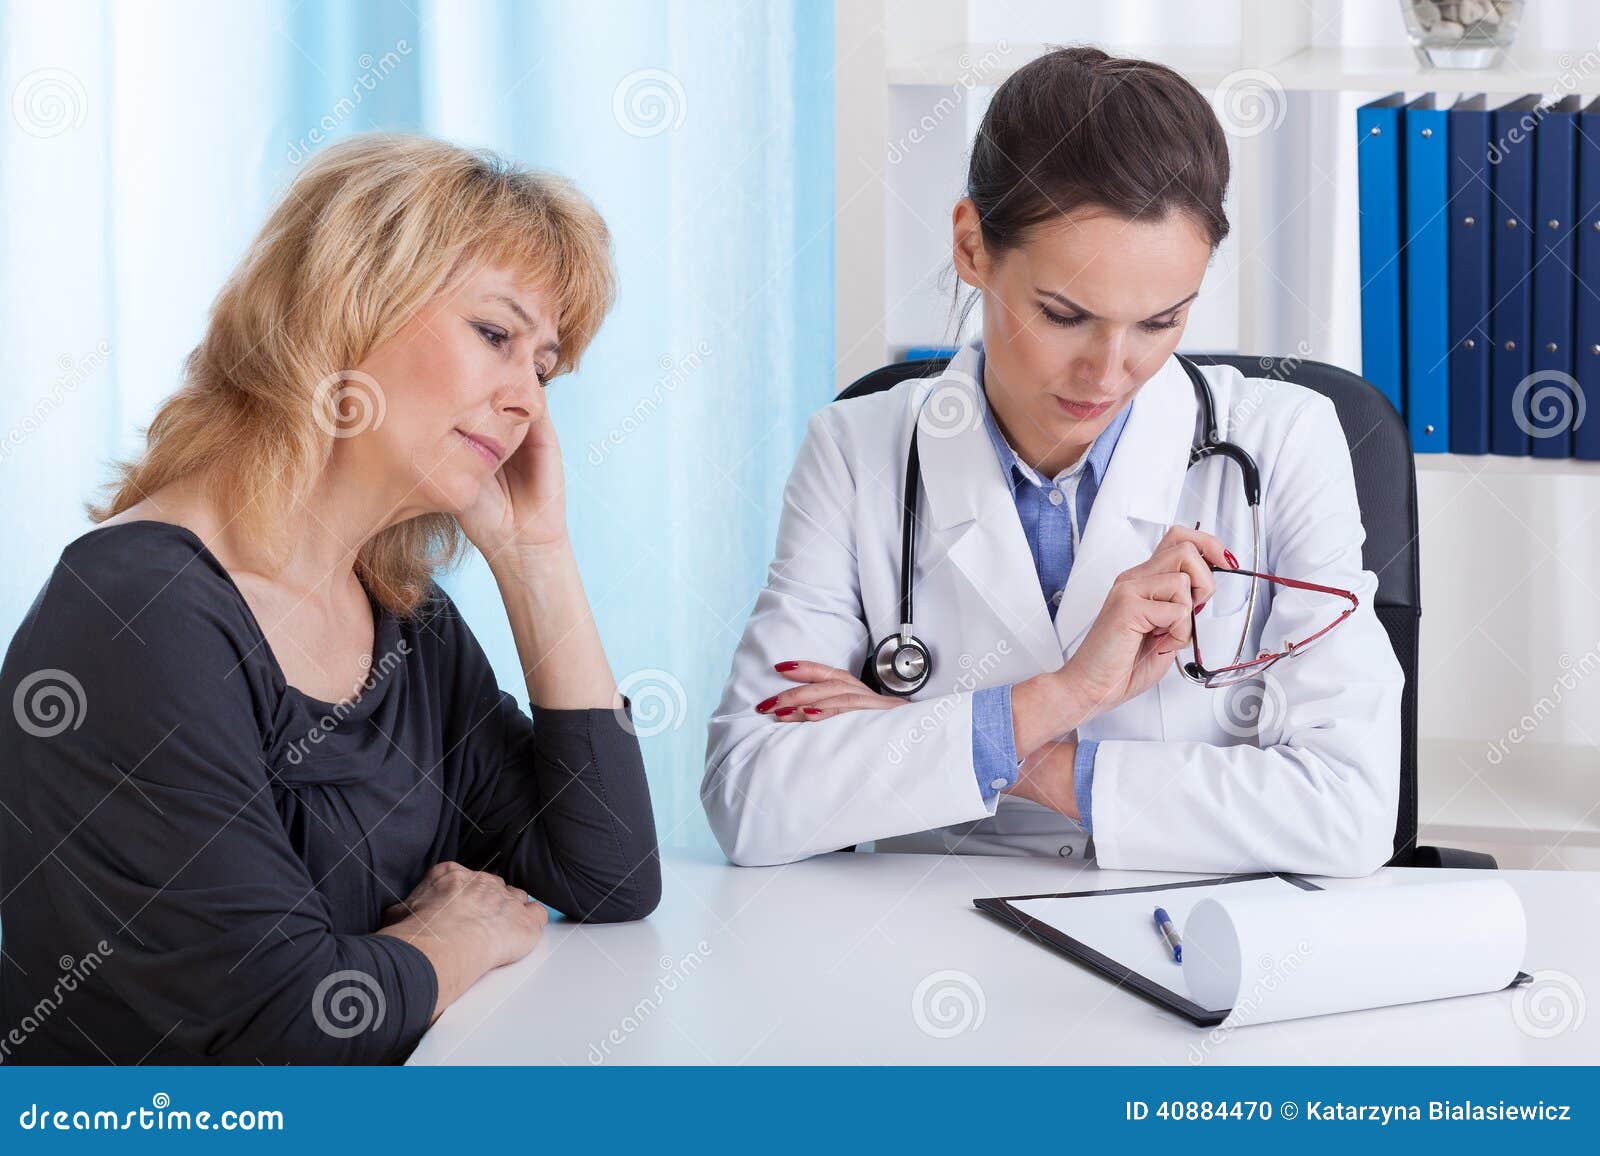 internist having bad news for a patient